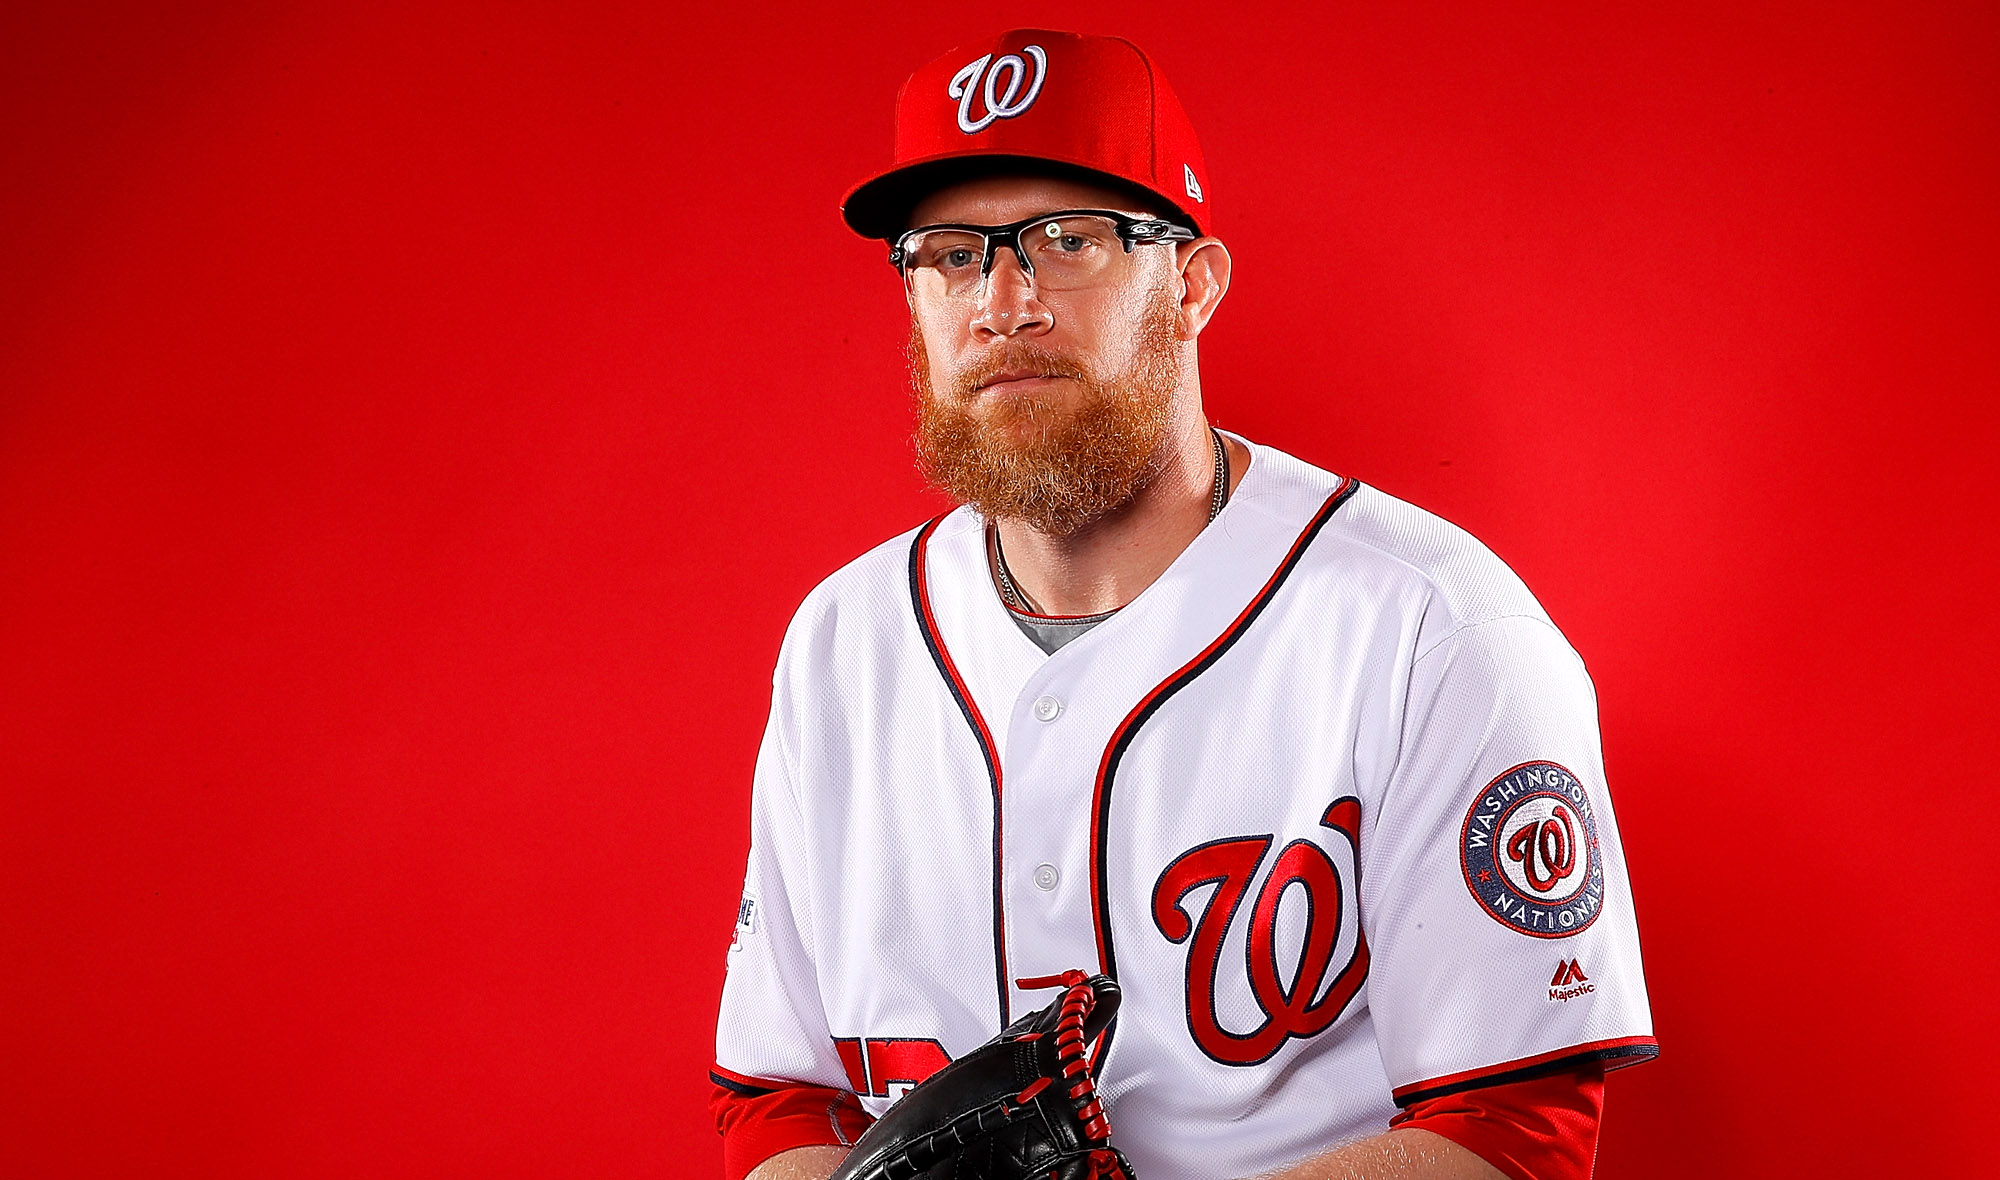 Sean Doolittle has some thoughts about MLB's proposal to restart